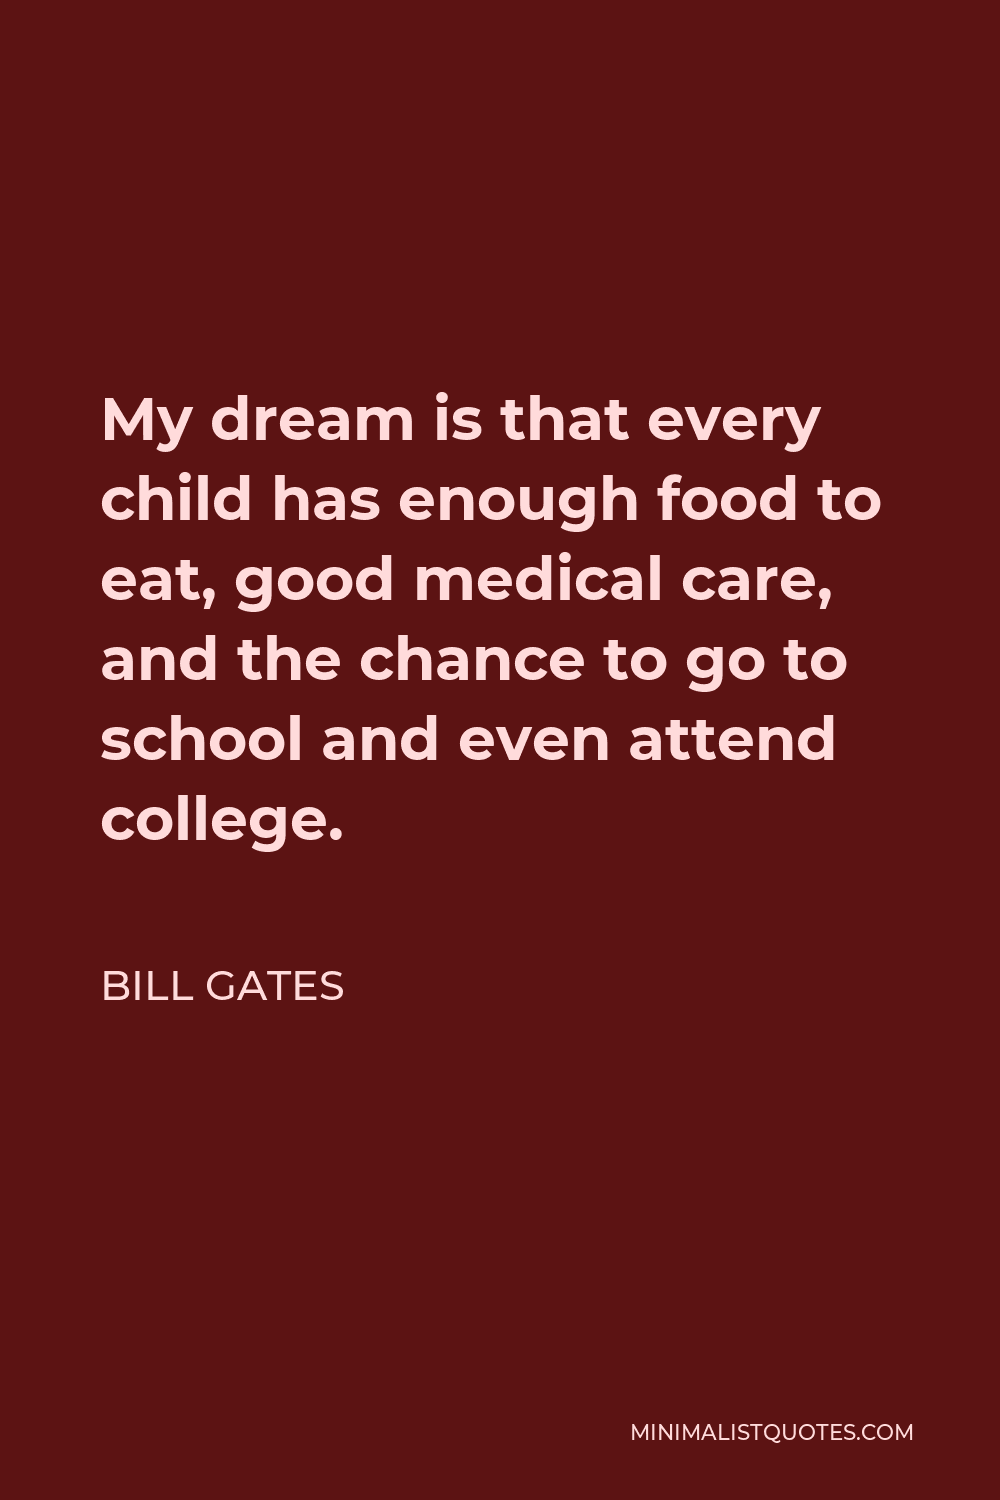 Bill Gates Quote - My dream is that every child has enough food to eat, good medical care, and the chance to go to school and even attend college.